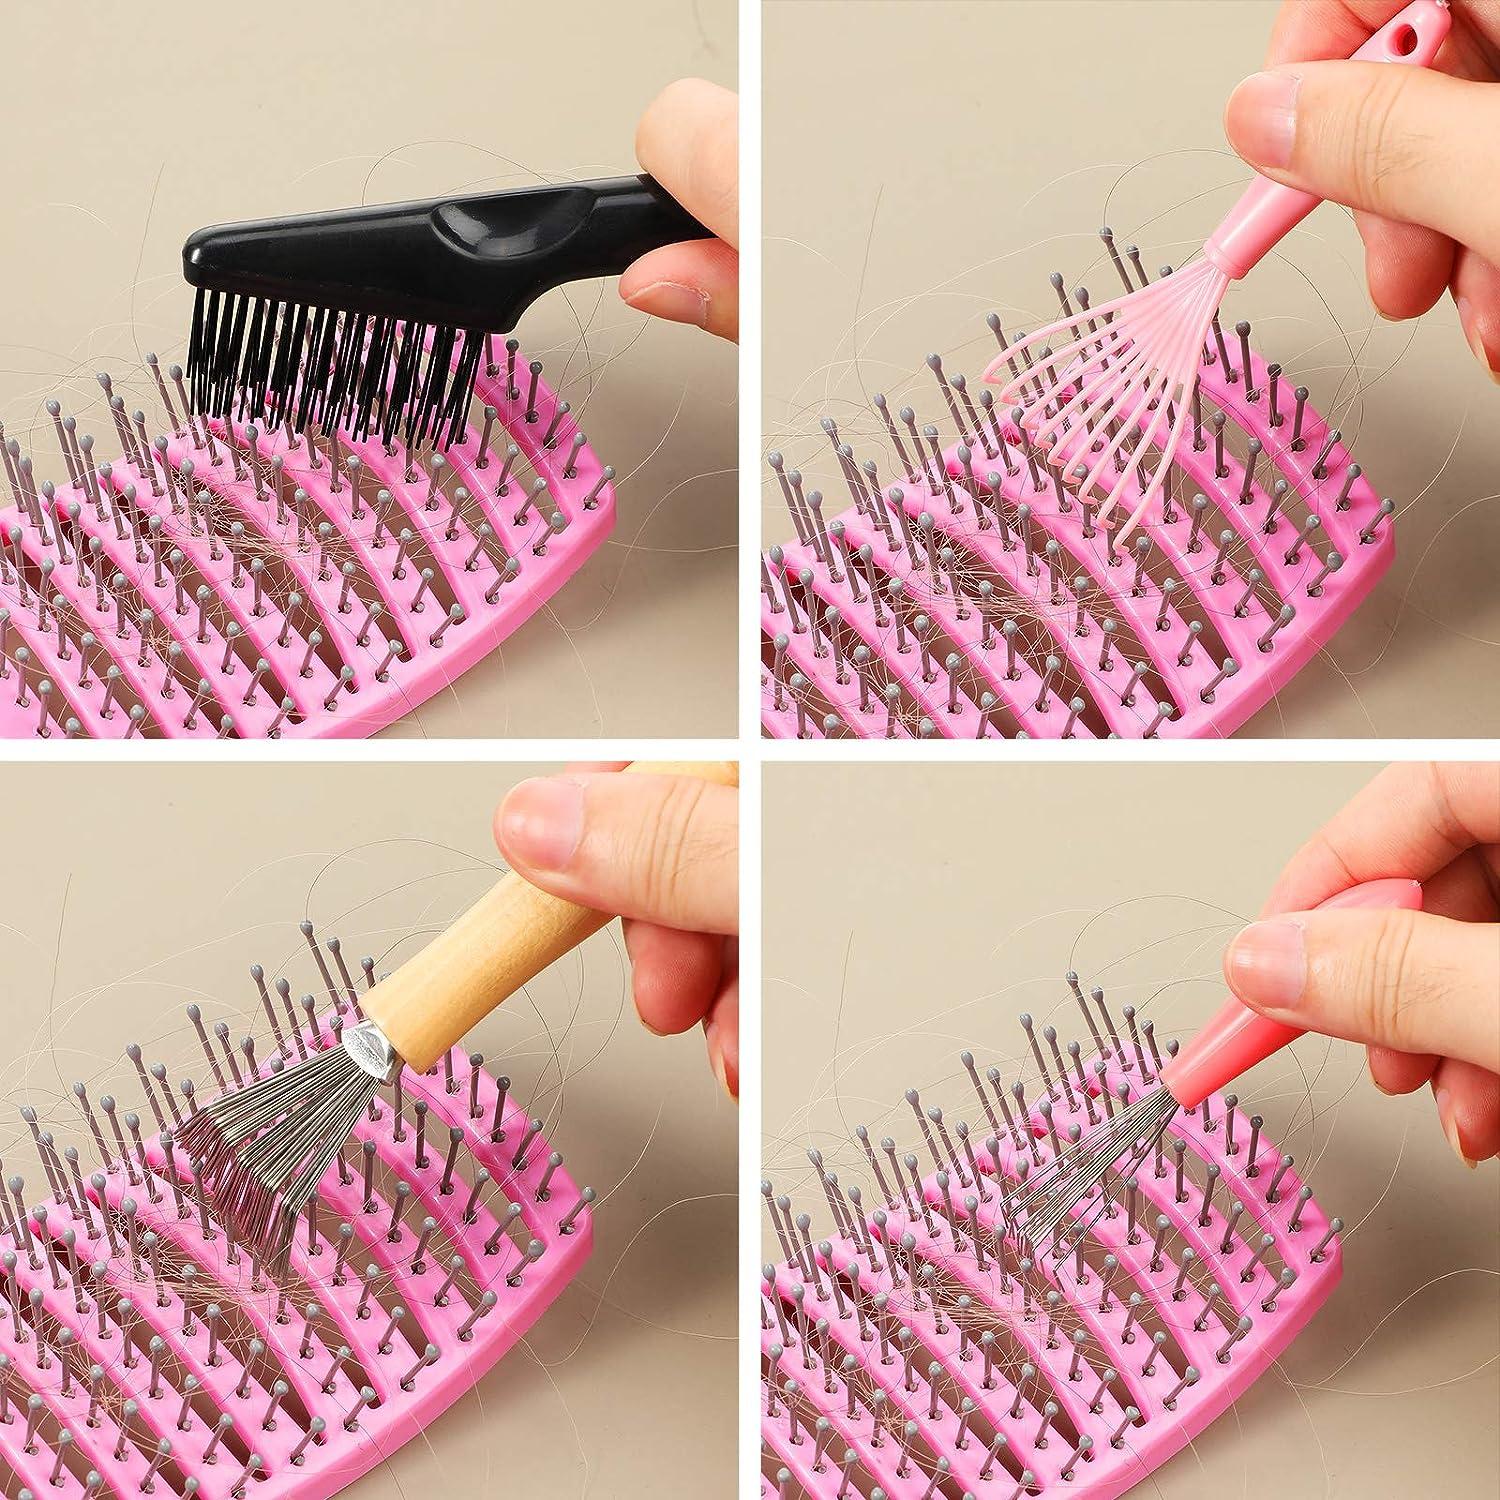 5 Pieces Comb Cleaner Tool Set Hair Brush Cleaner Rake Comb